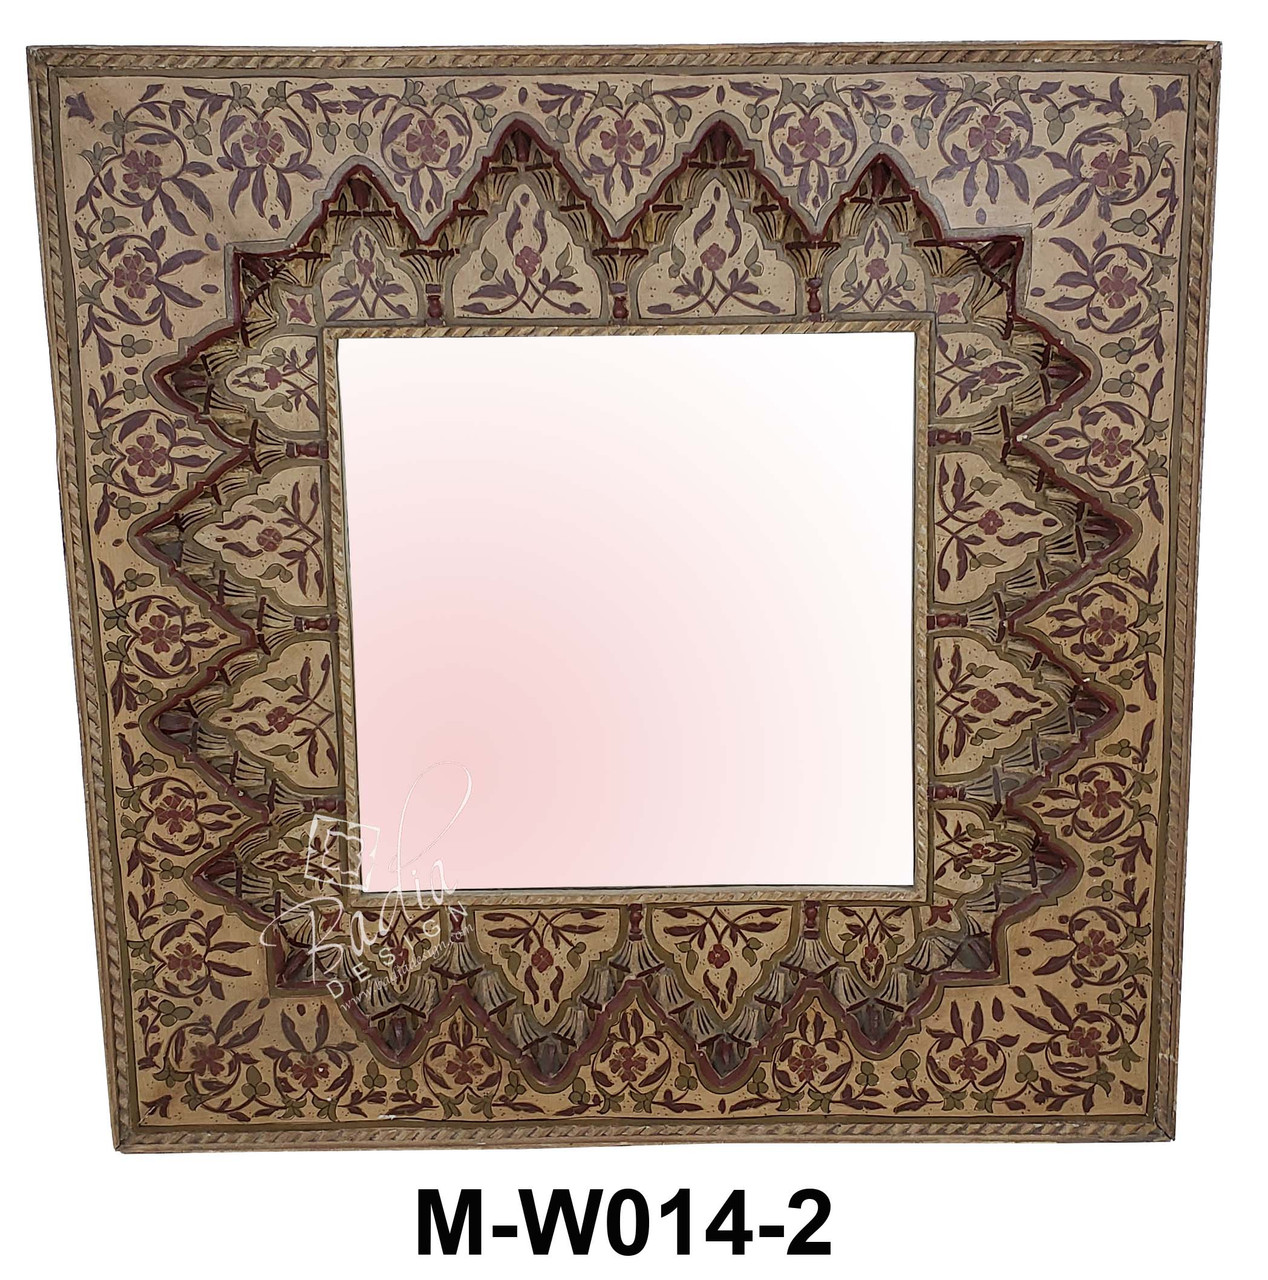 Vintage Hand Carved and Hand Painted Wooden Mirror - M-W014